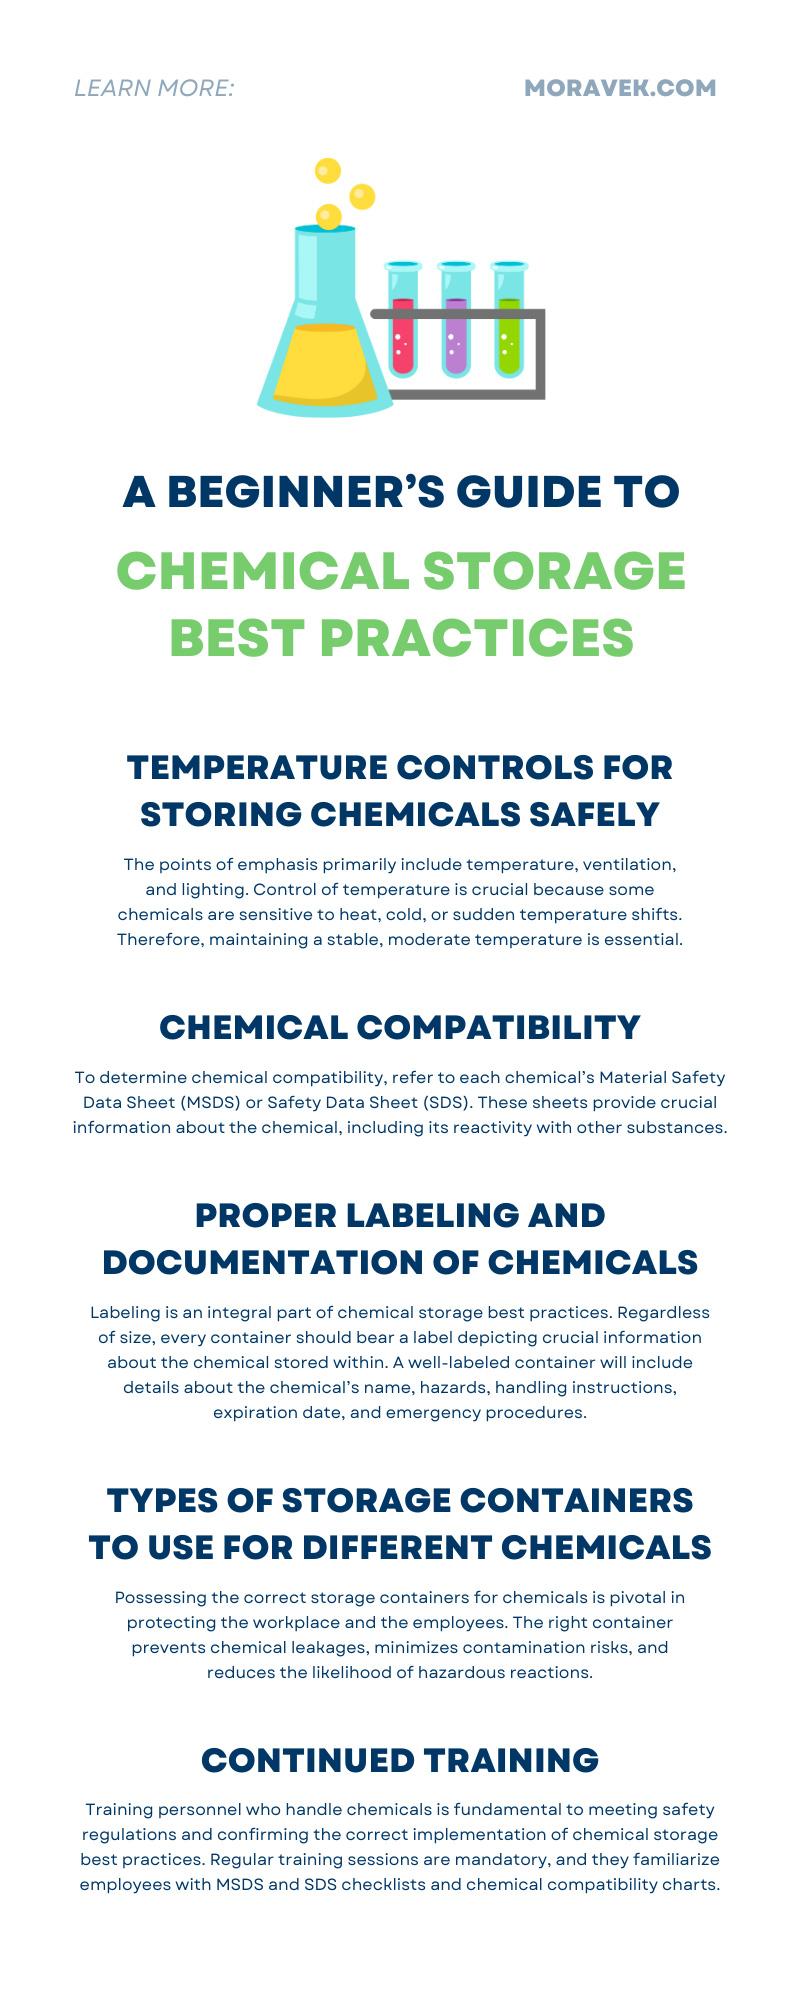 A Beginner’s Guide to Chemical Storage Best Practices
